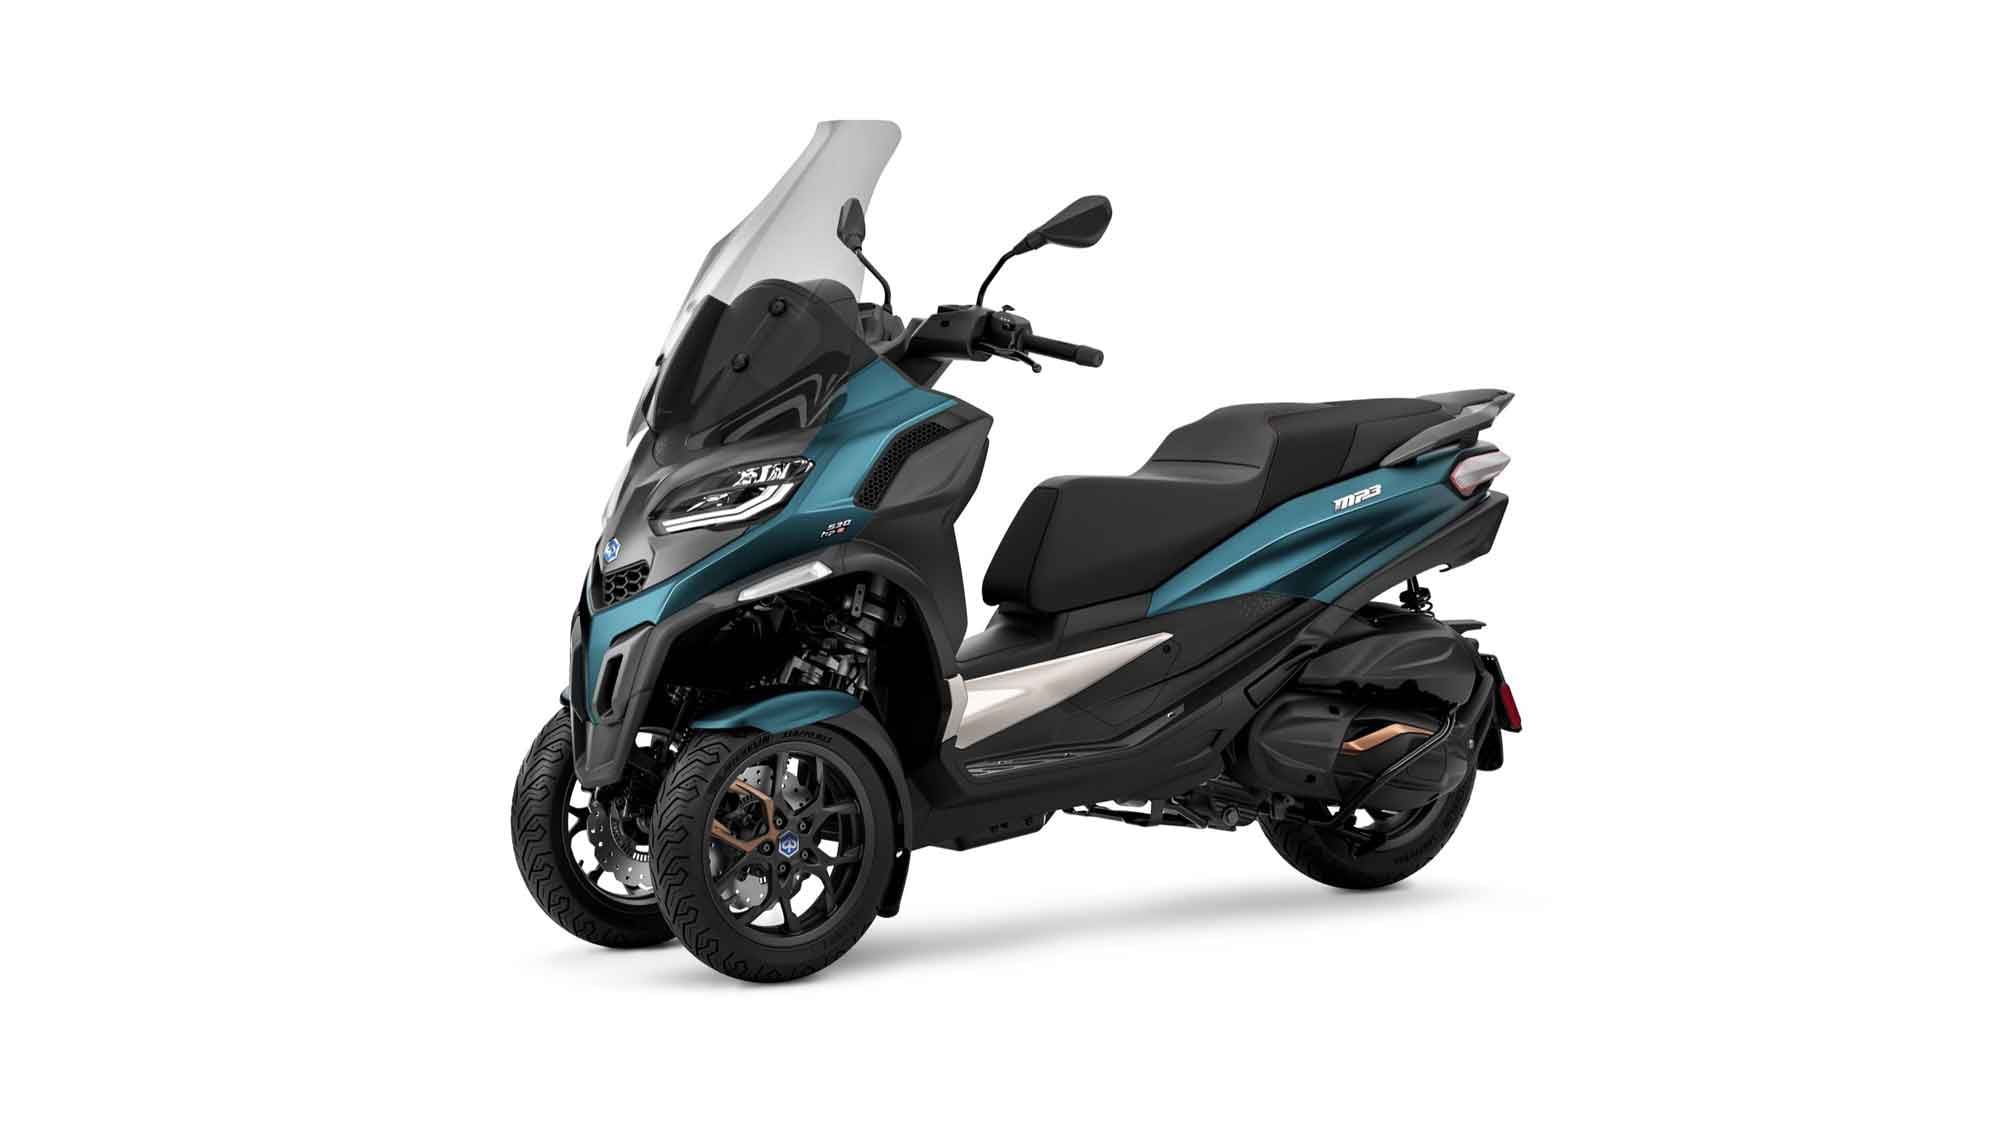 Others have attempted the leaning three-wheeler, but Piaggio has it dialed in with the MP3.